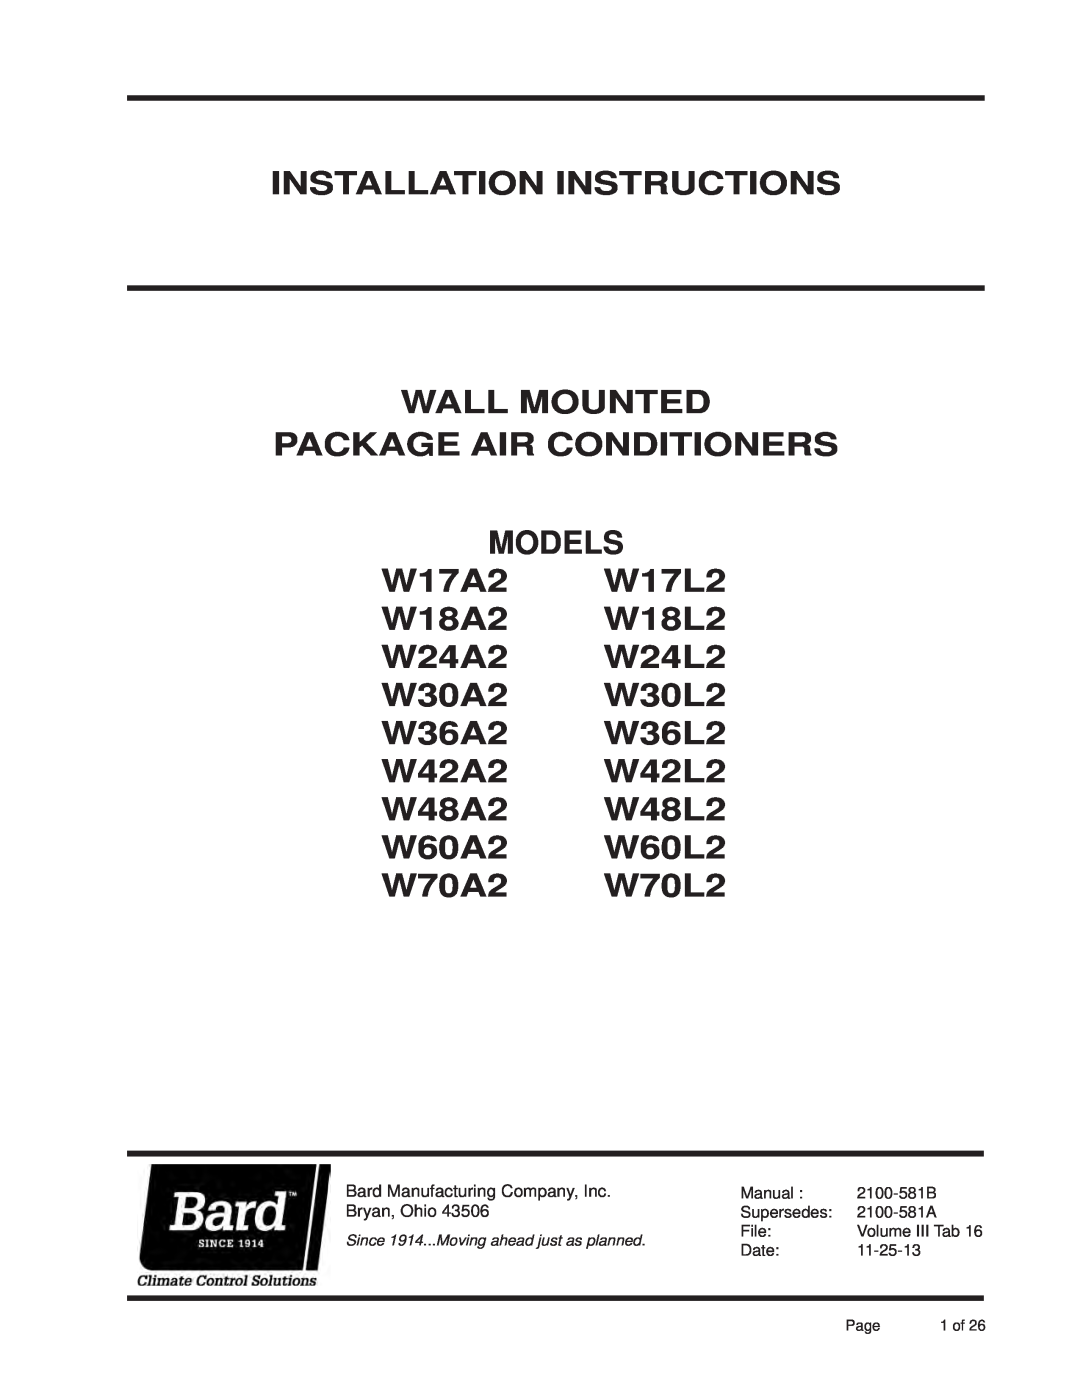 Bard w17a2 installation instructions Installation Instructions Wall Mounted, PACKAGE AIR CONDITIONERS MODELS W17A2 W17L2 